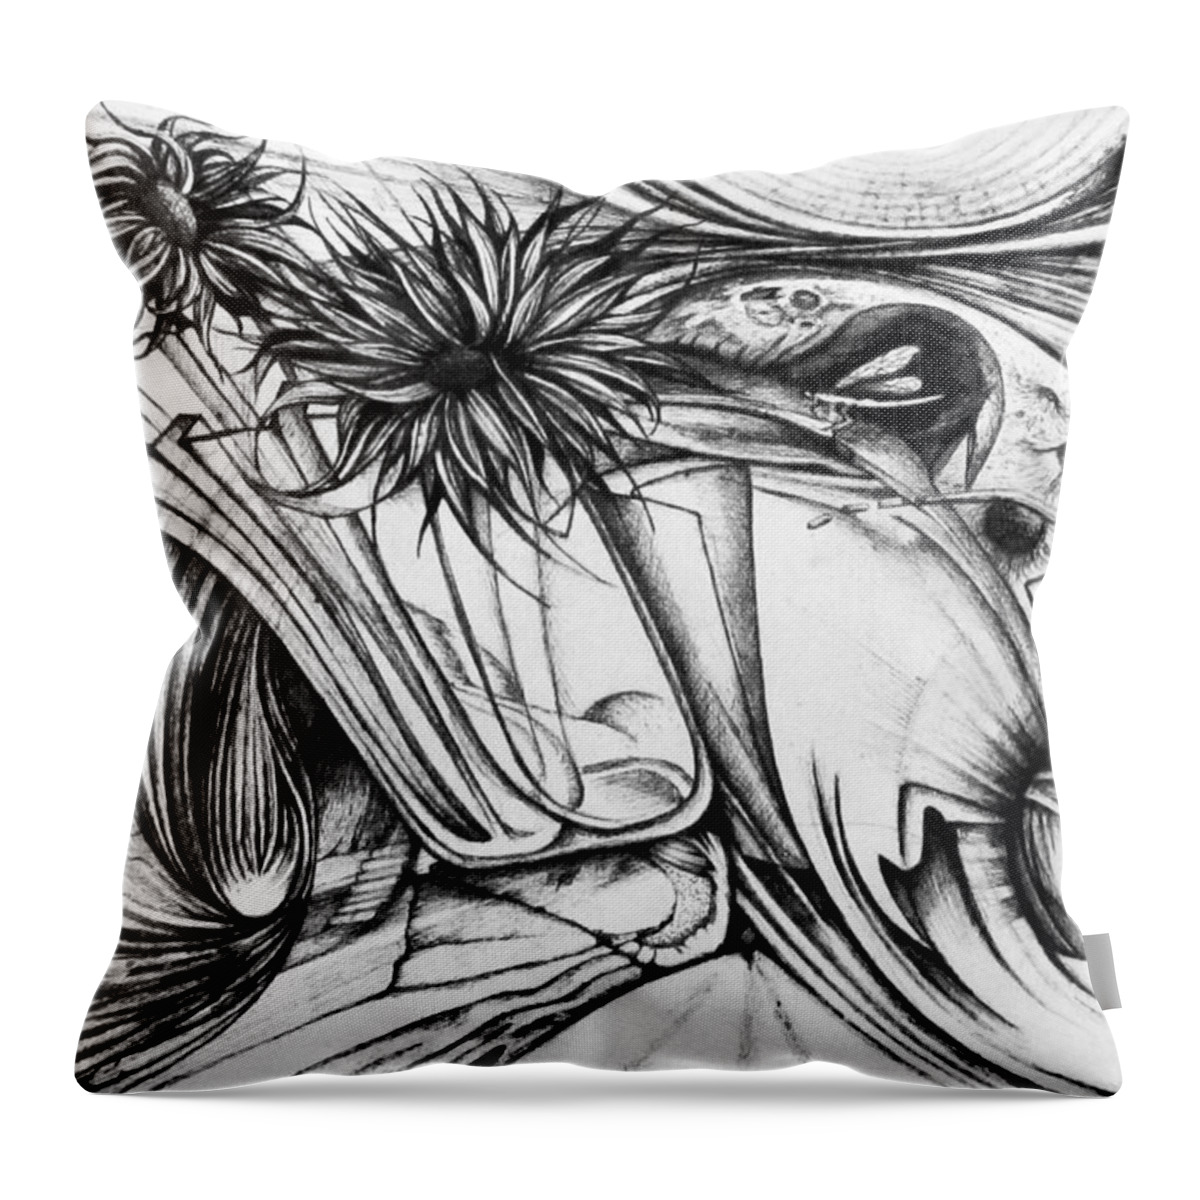 Flowers Throw Pillow featuring the drawing Meanwhile 9 by Nad Wolinska